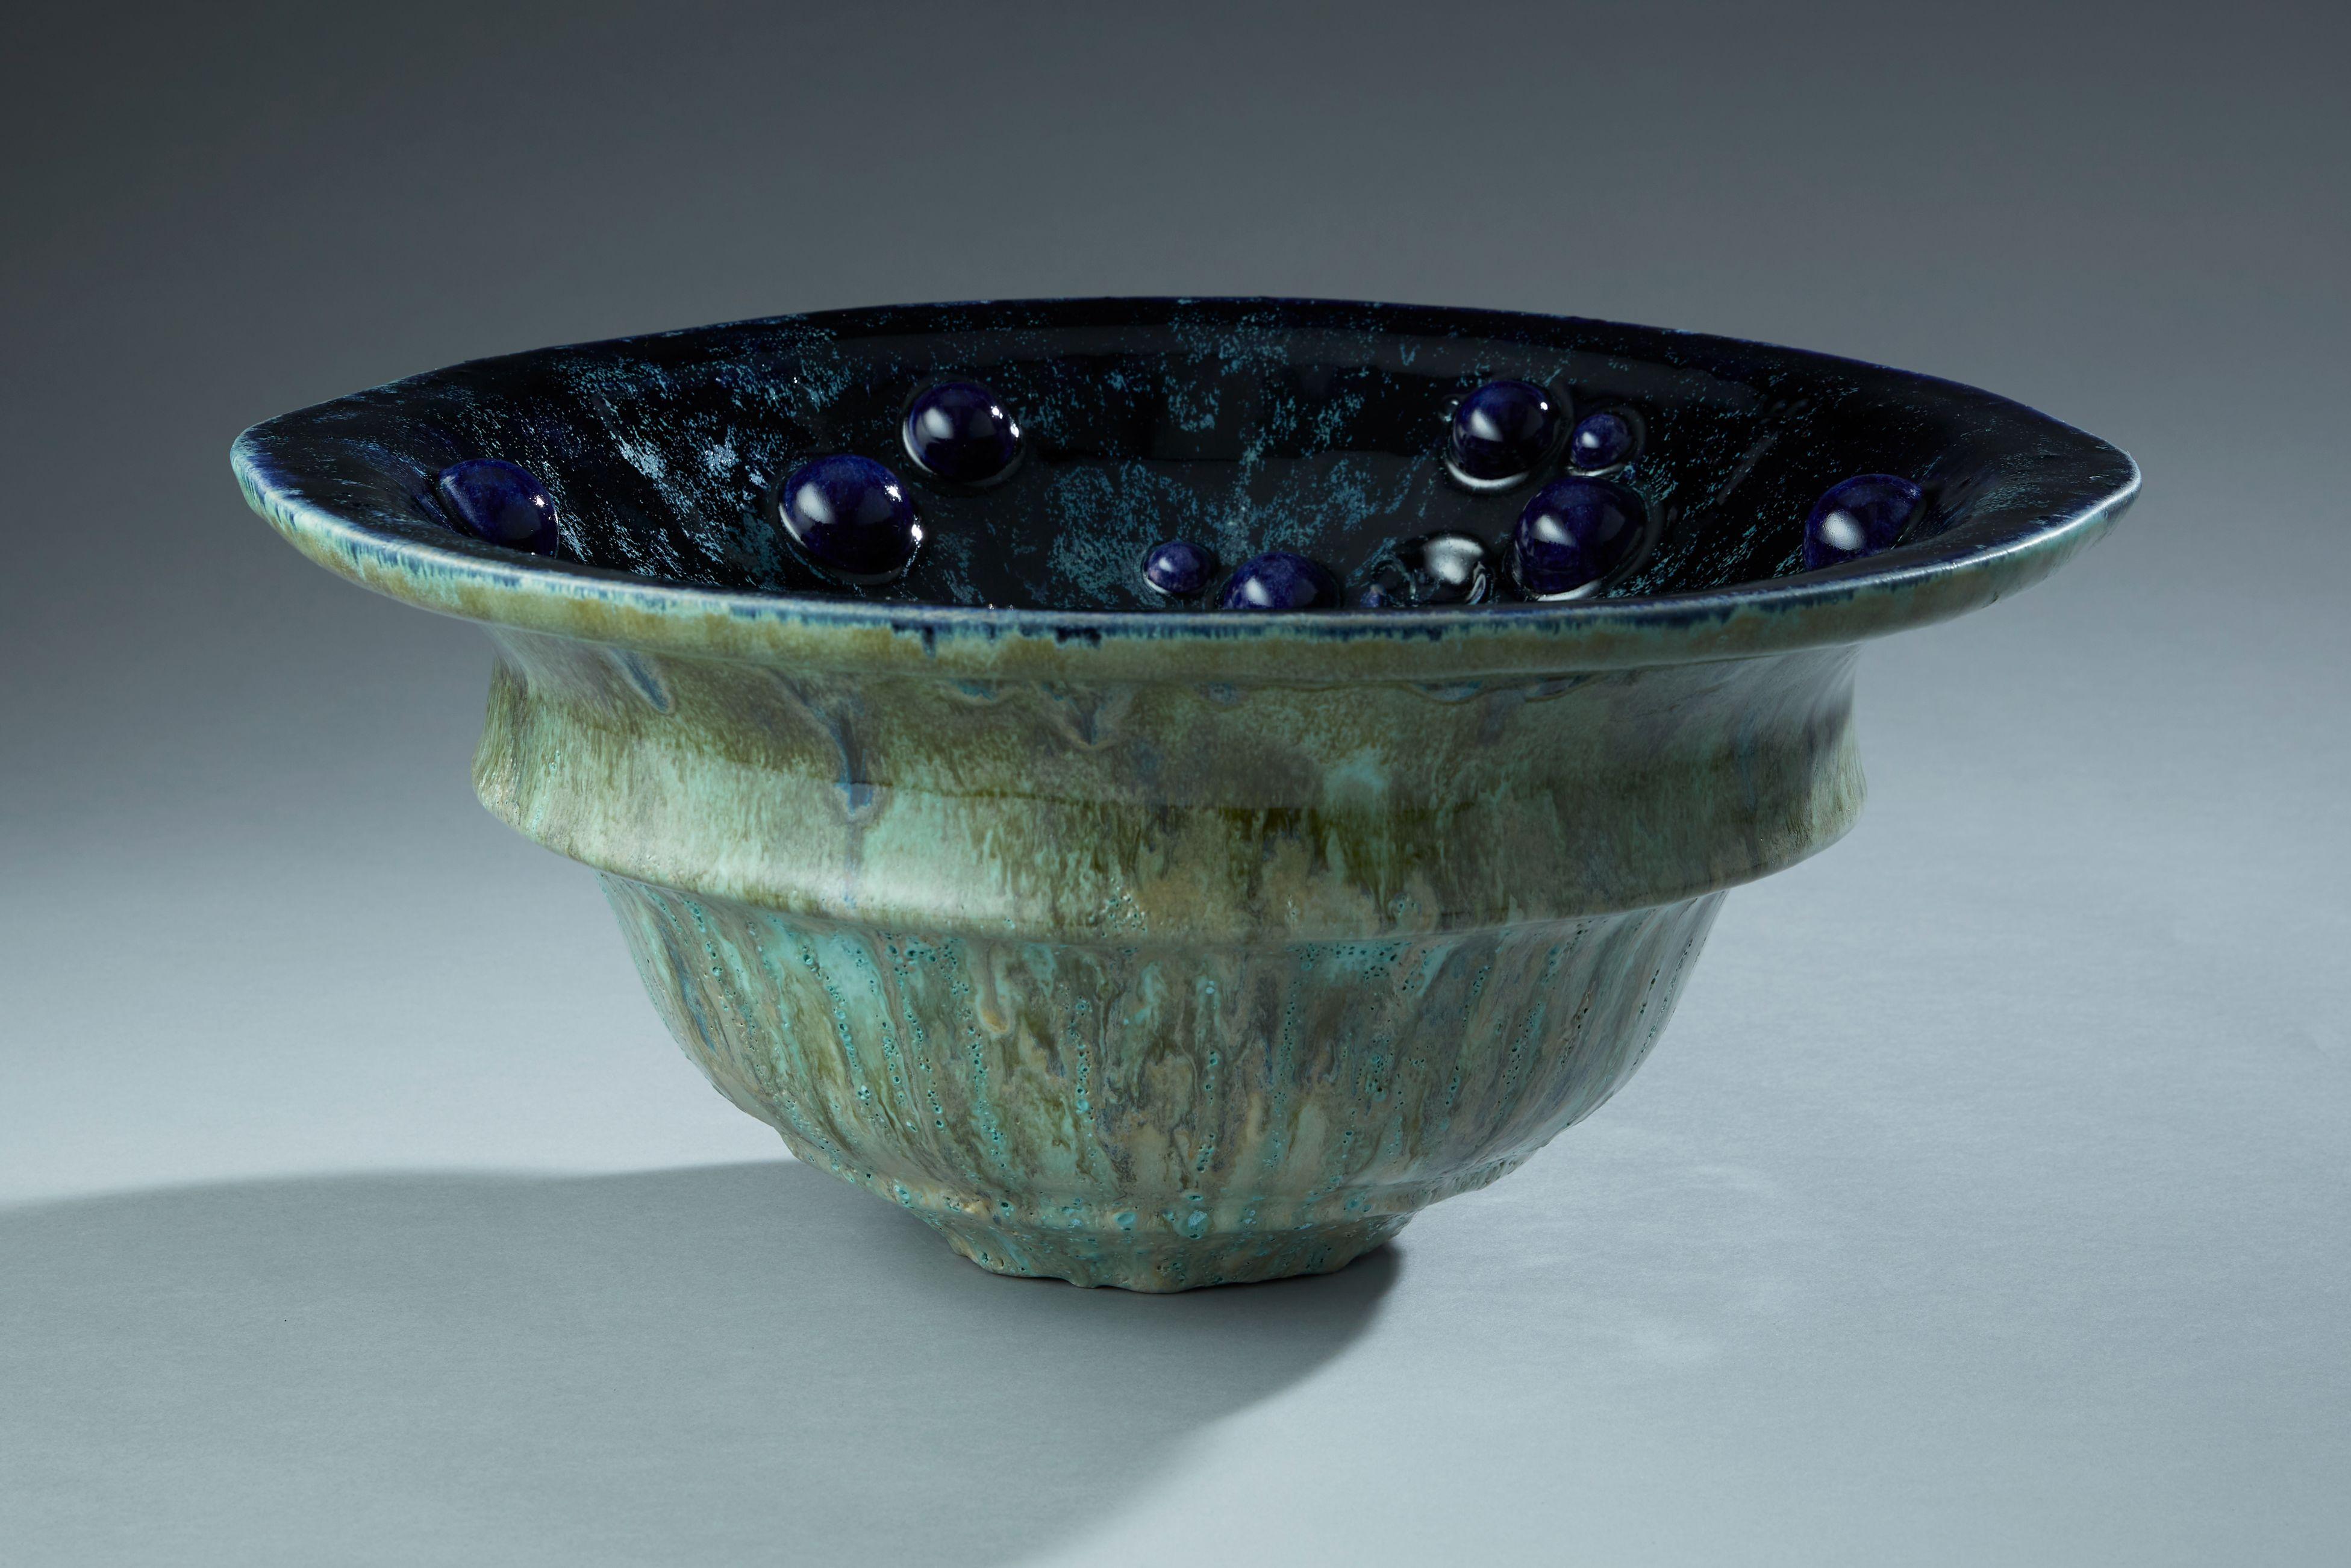 Violante Lodolo D'Oria, sapphire blue & green constellation vessel, 2021, glazed stoneware. Measures: W44cm x H22cm

New stunning piece created by ceramic artist Violante Lodolo d' Oria. The layering of different glazes creates shimmering and